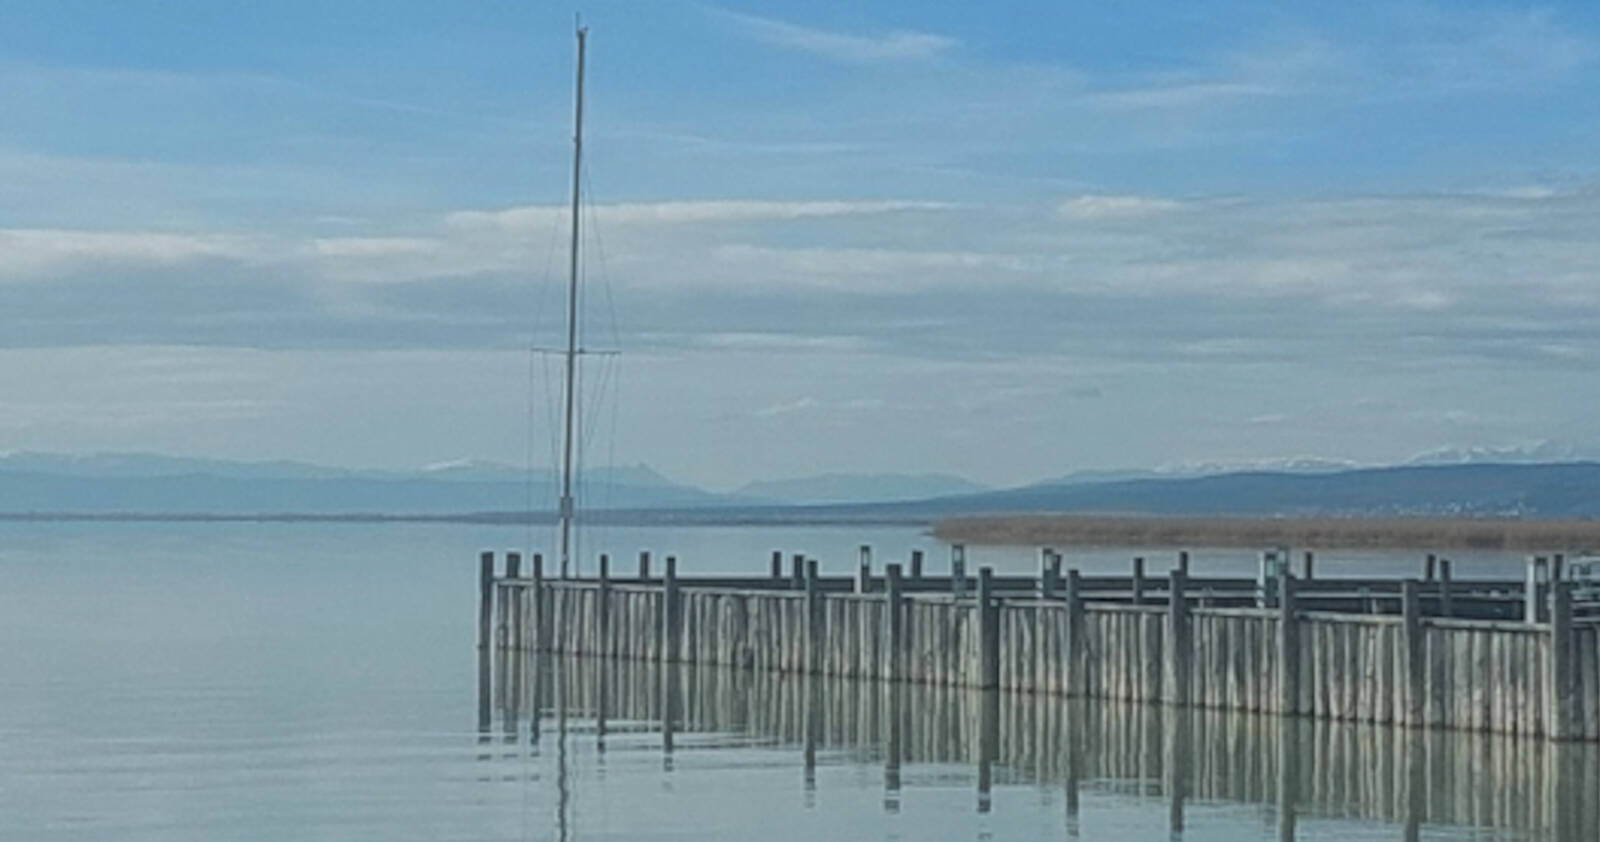 Image of Neusiedler See (from Segelhafen West) by Alec Moody